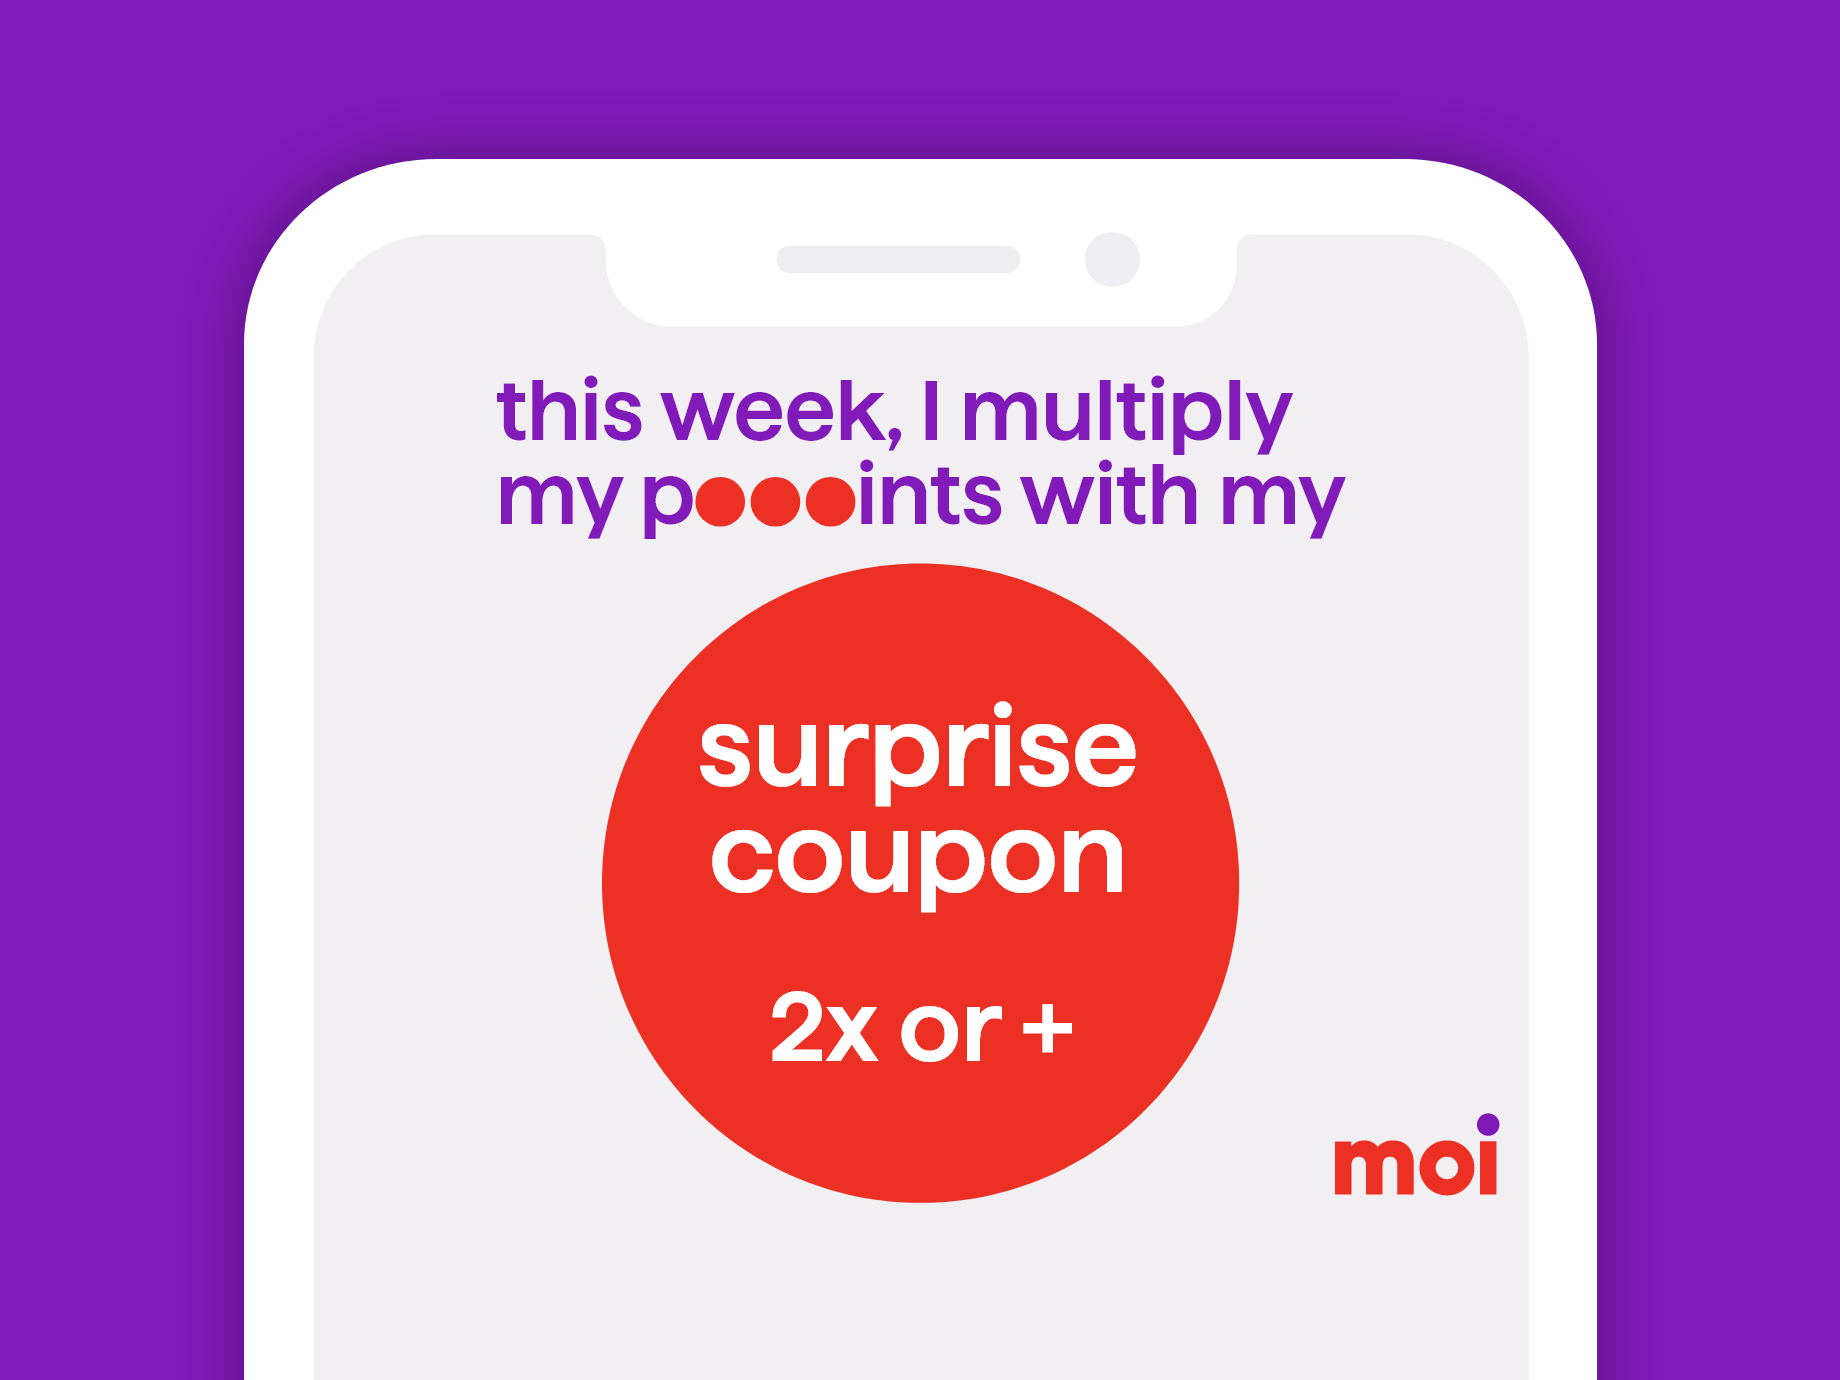 this week, I multiply my poooints with my surprise coupon 2x or +